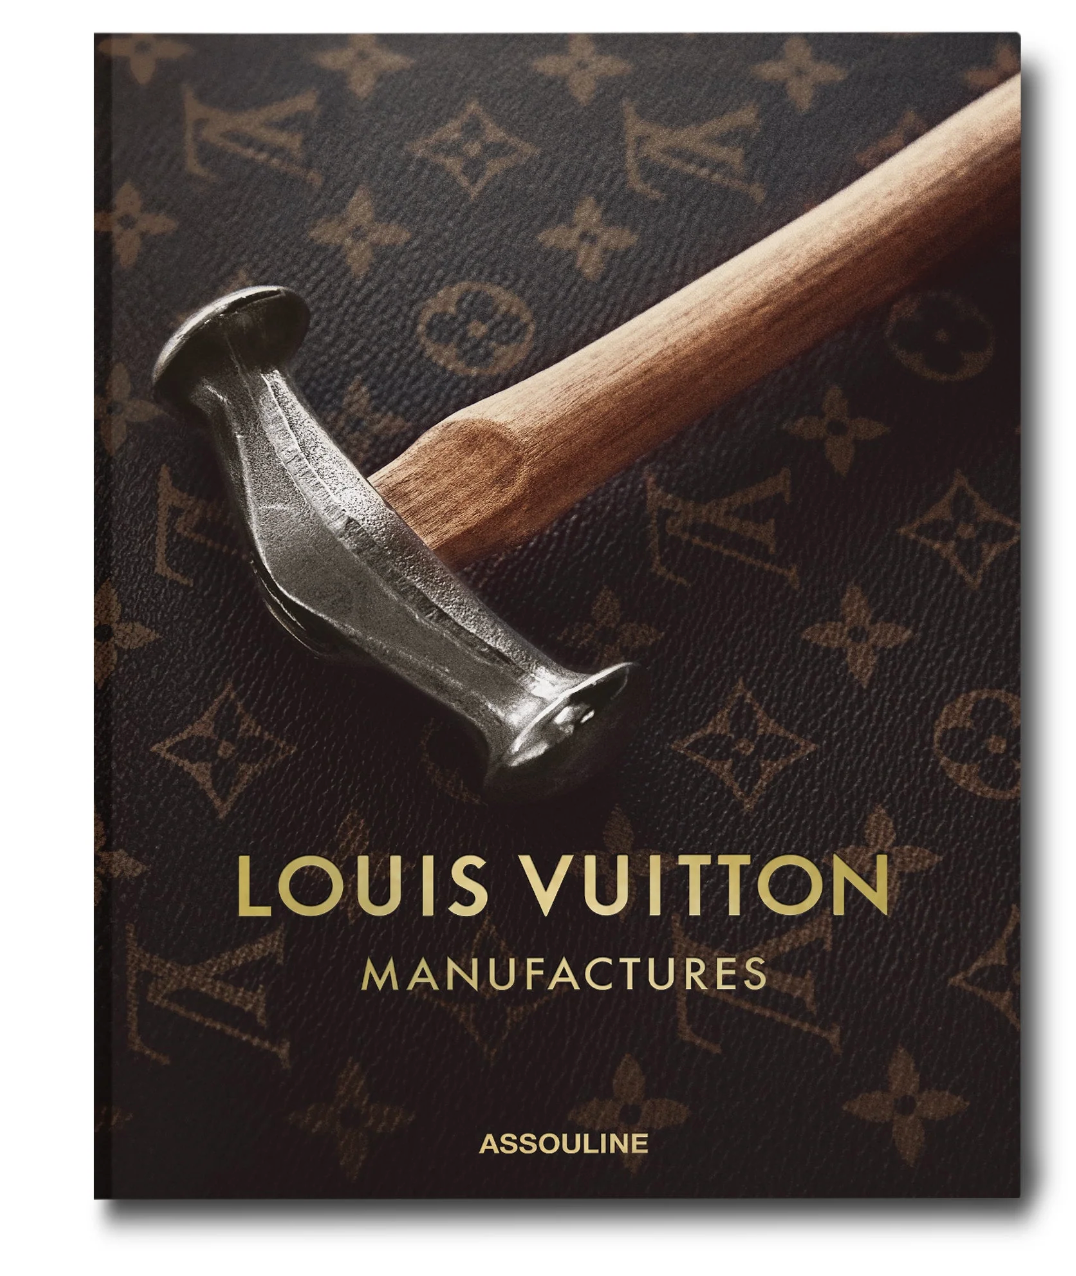 LV Manufactures